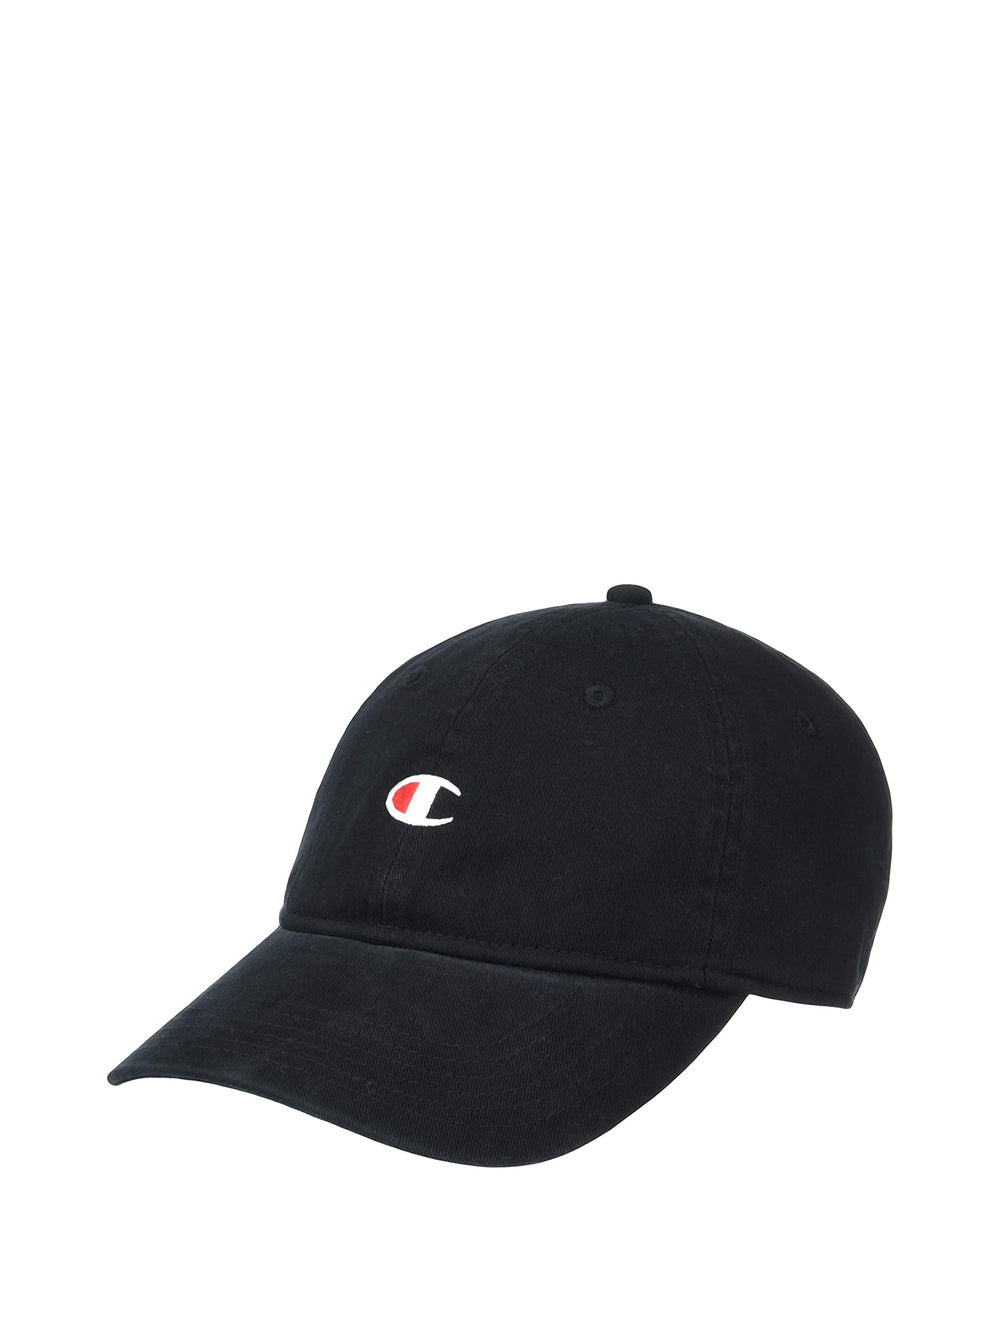 CHAMPION GARMENT WASHED RELAXED HAT - BLACK - CLEARANCE